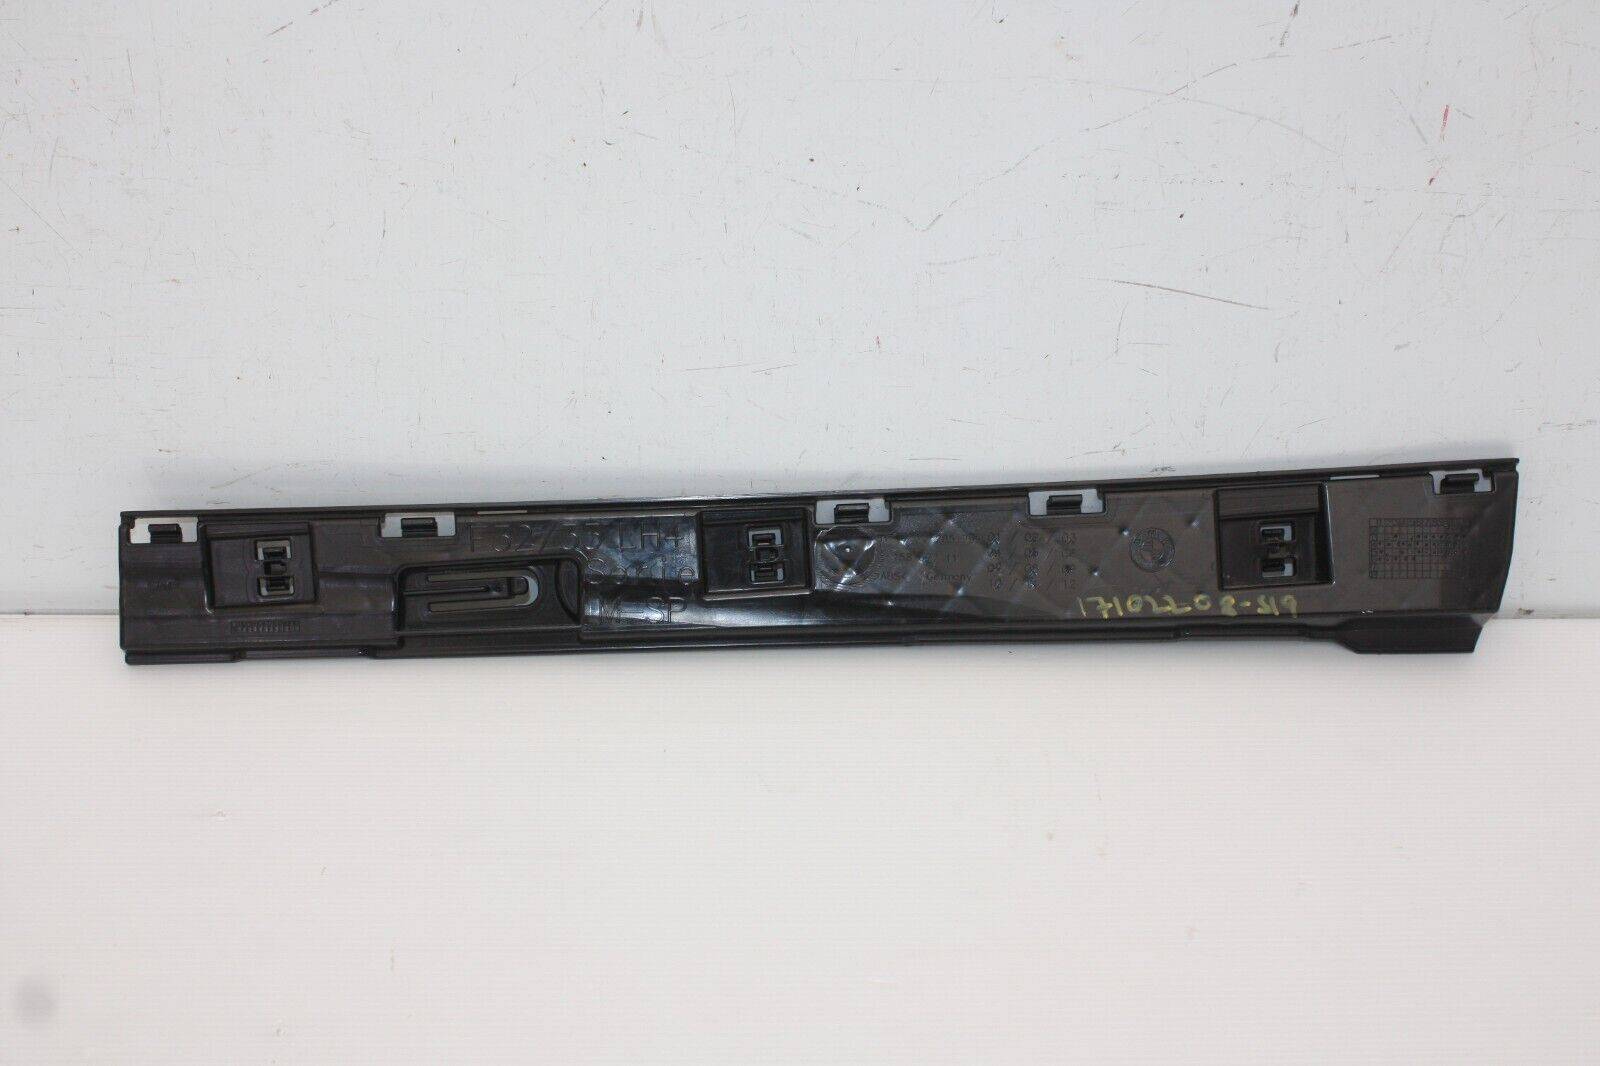 BMW 4 Series F32 F33 Sill Supporting Ledge Left Side Mount Bracket 51777285795 175453848486